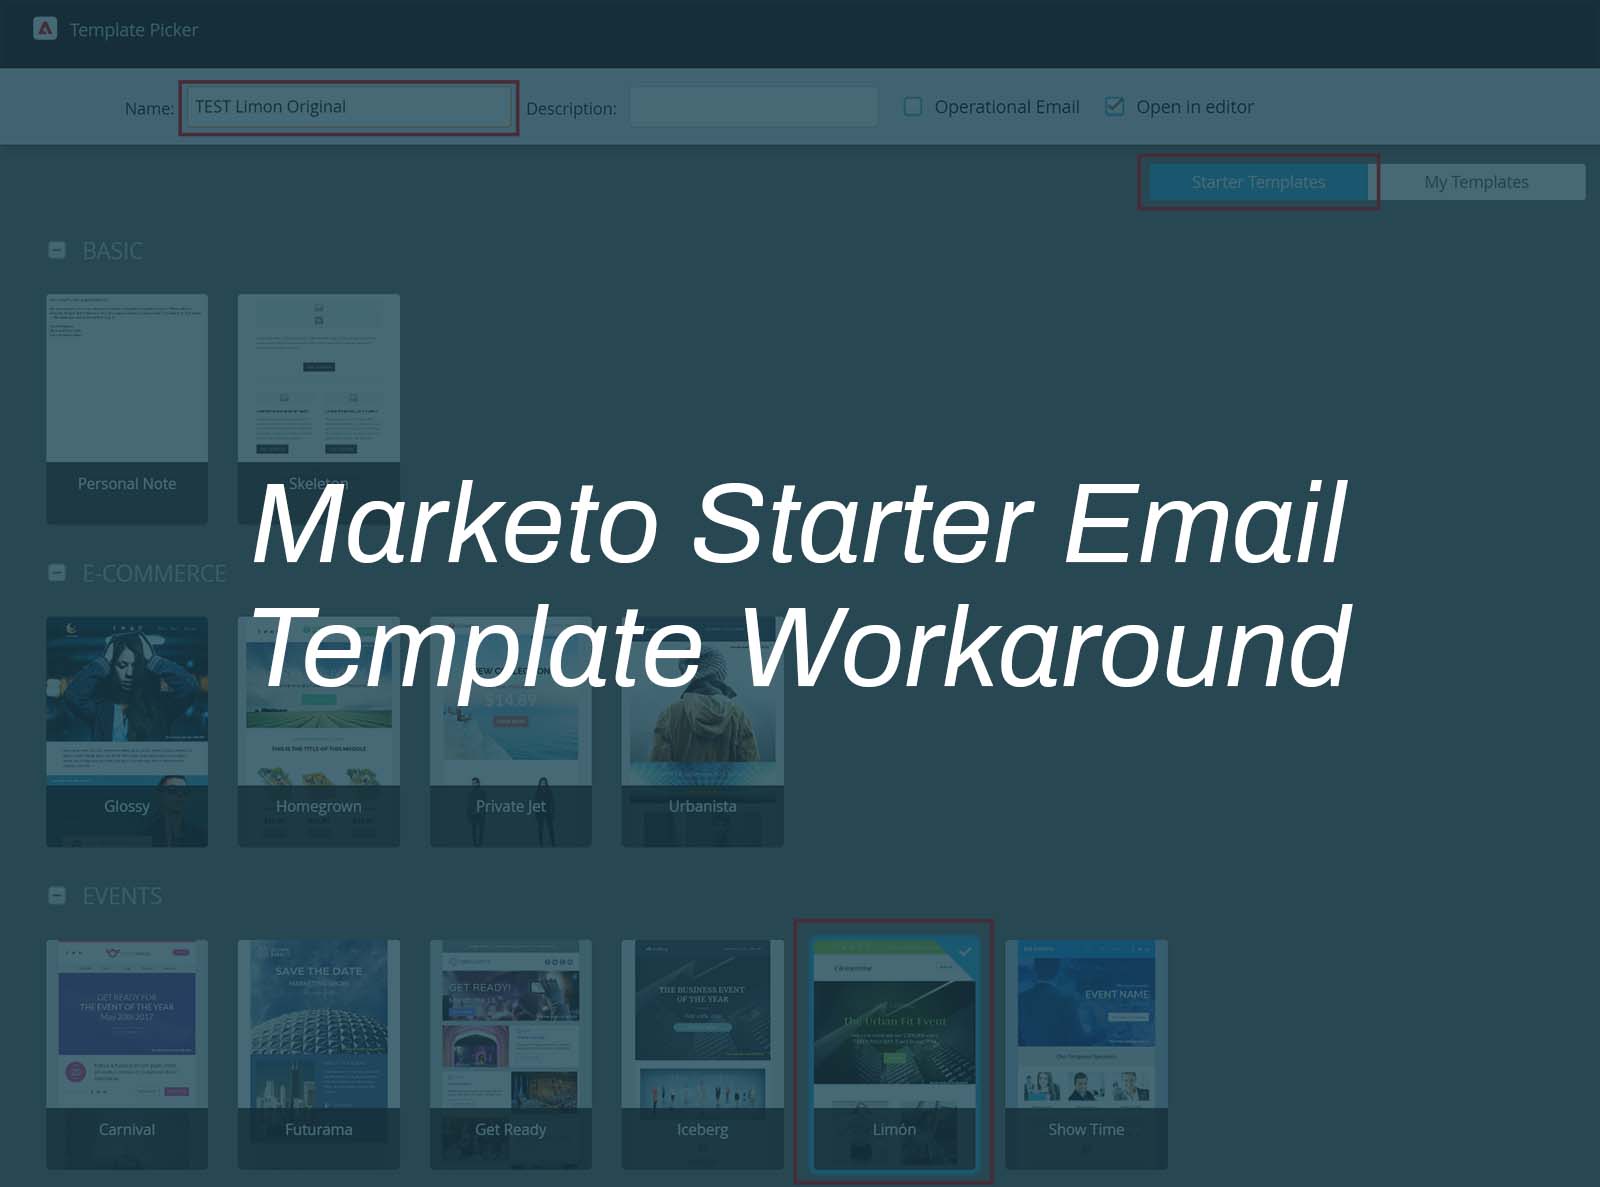 How to Update (i.e. fix) Marketo Starter Email Templates